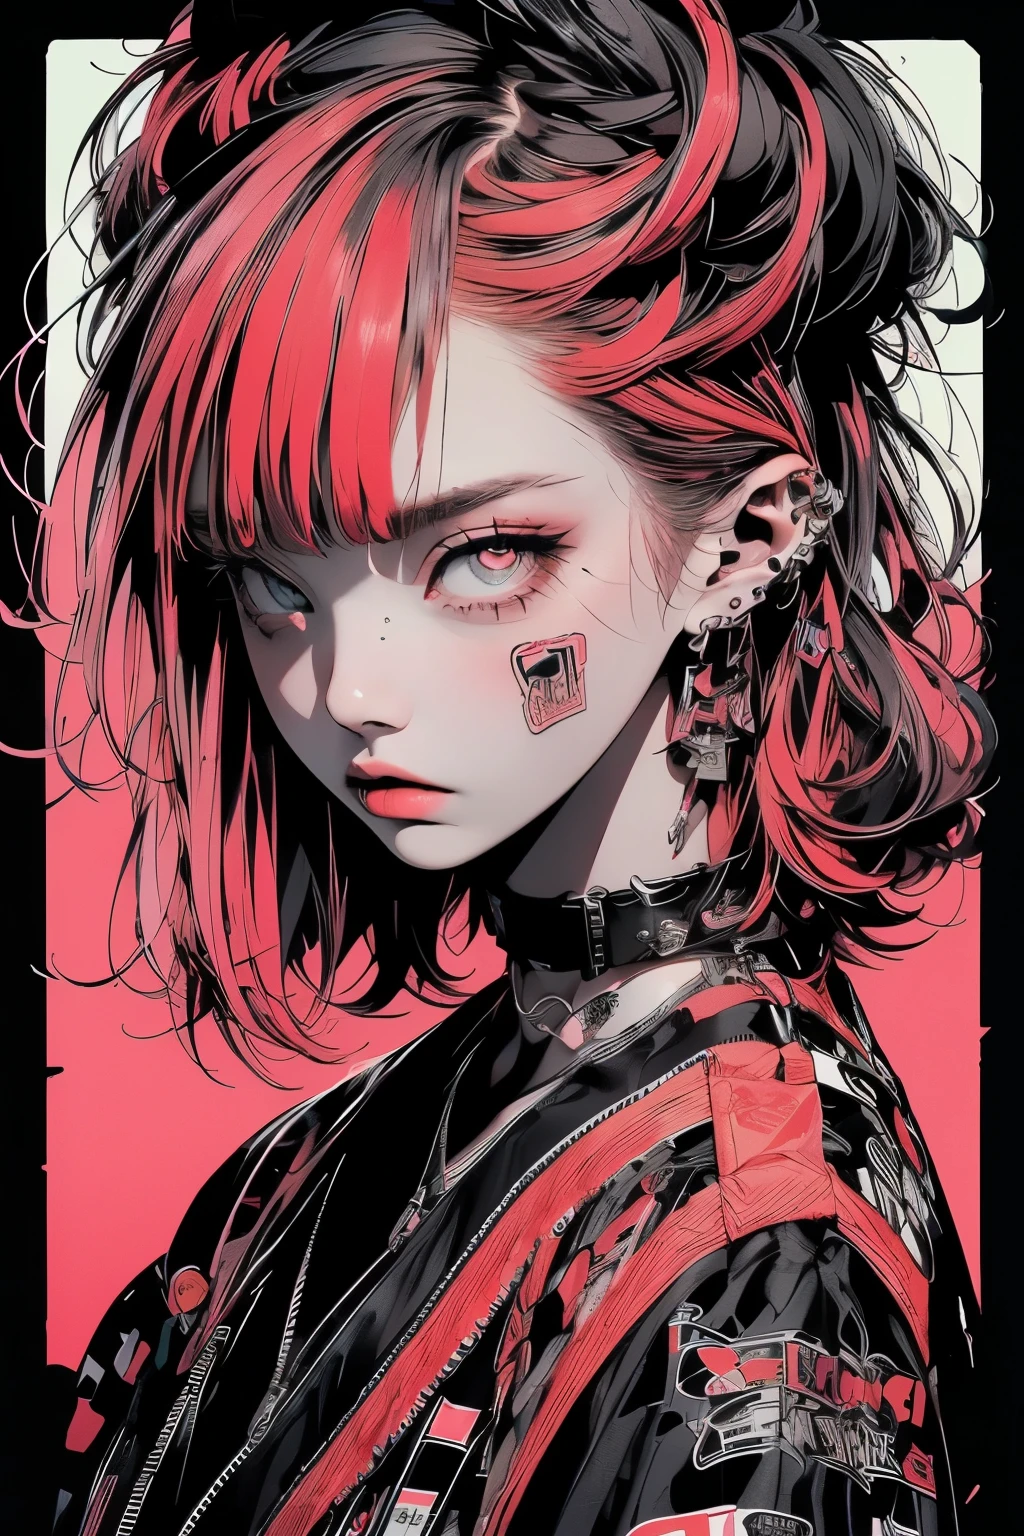 ((((Dramático))), (((corajoso))), (((Intenso))) film poster featuring a young red hair mulher as the central character. She stands confiantely in the center of the poster, wearing a à moda and edgy Harajuku-inspired hip hop roupa, with a determined expressão on her face. The Fundo is aesthetic atmospheric dark and corajoso, com uma sensação de perigo e intensidade. The text is audacioso and chamativo, with a cativante tagline that adds to the overall feeling of drama and excitement. The color palette is mainly dark with splashes of vibrante neon colors, giving the poster a dinâmico and visually impressionante appearance,tachi-e
(revista:1.3), (cobrir-style:1.3), modaable, mulher, vibrante, roupa, pose sexy e sedutora, frente, colorida, dinâmico, Fundo, elementos, confiante, expressão, contenção, declaração, acessório, majestoso, enrolado, em volta, Tocar, Cena, text, cobrir, audacioso, chamativo, Título, à moda, font, cativante, título, maior, impressionante, moderno, tendências, foco, moda,